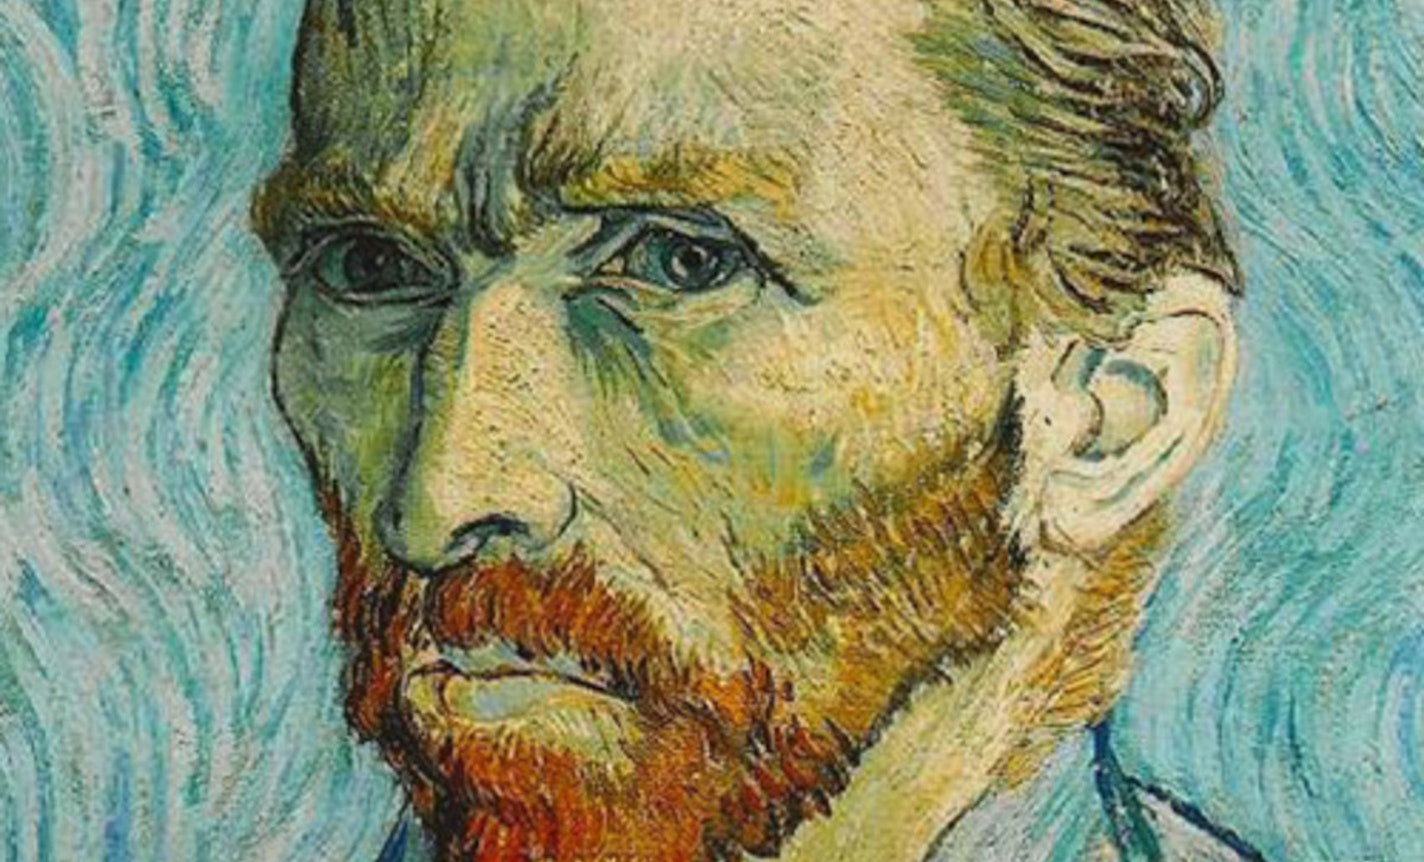 HOW VINCENT VAN GOGH TAUGHT ME TO OVERCOME "FEAR OF DEATH"